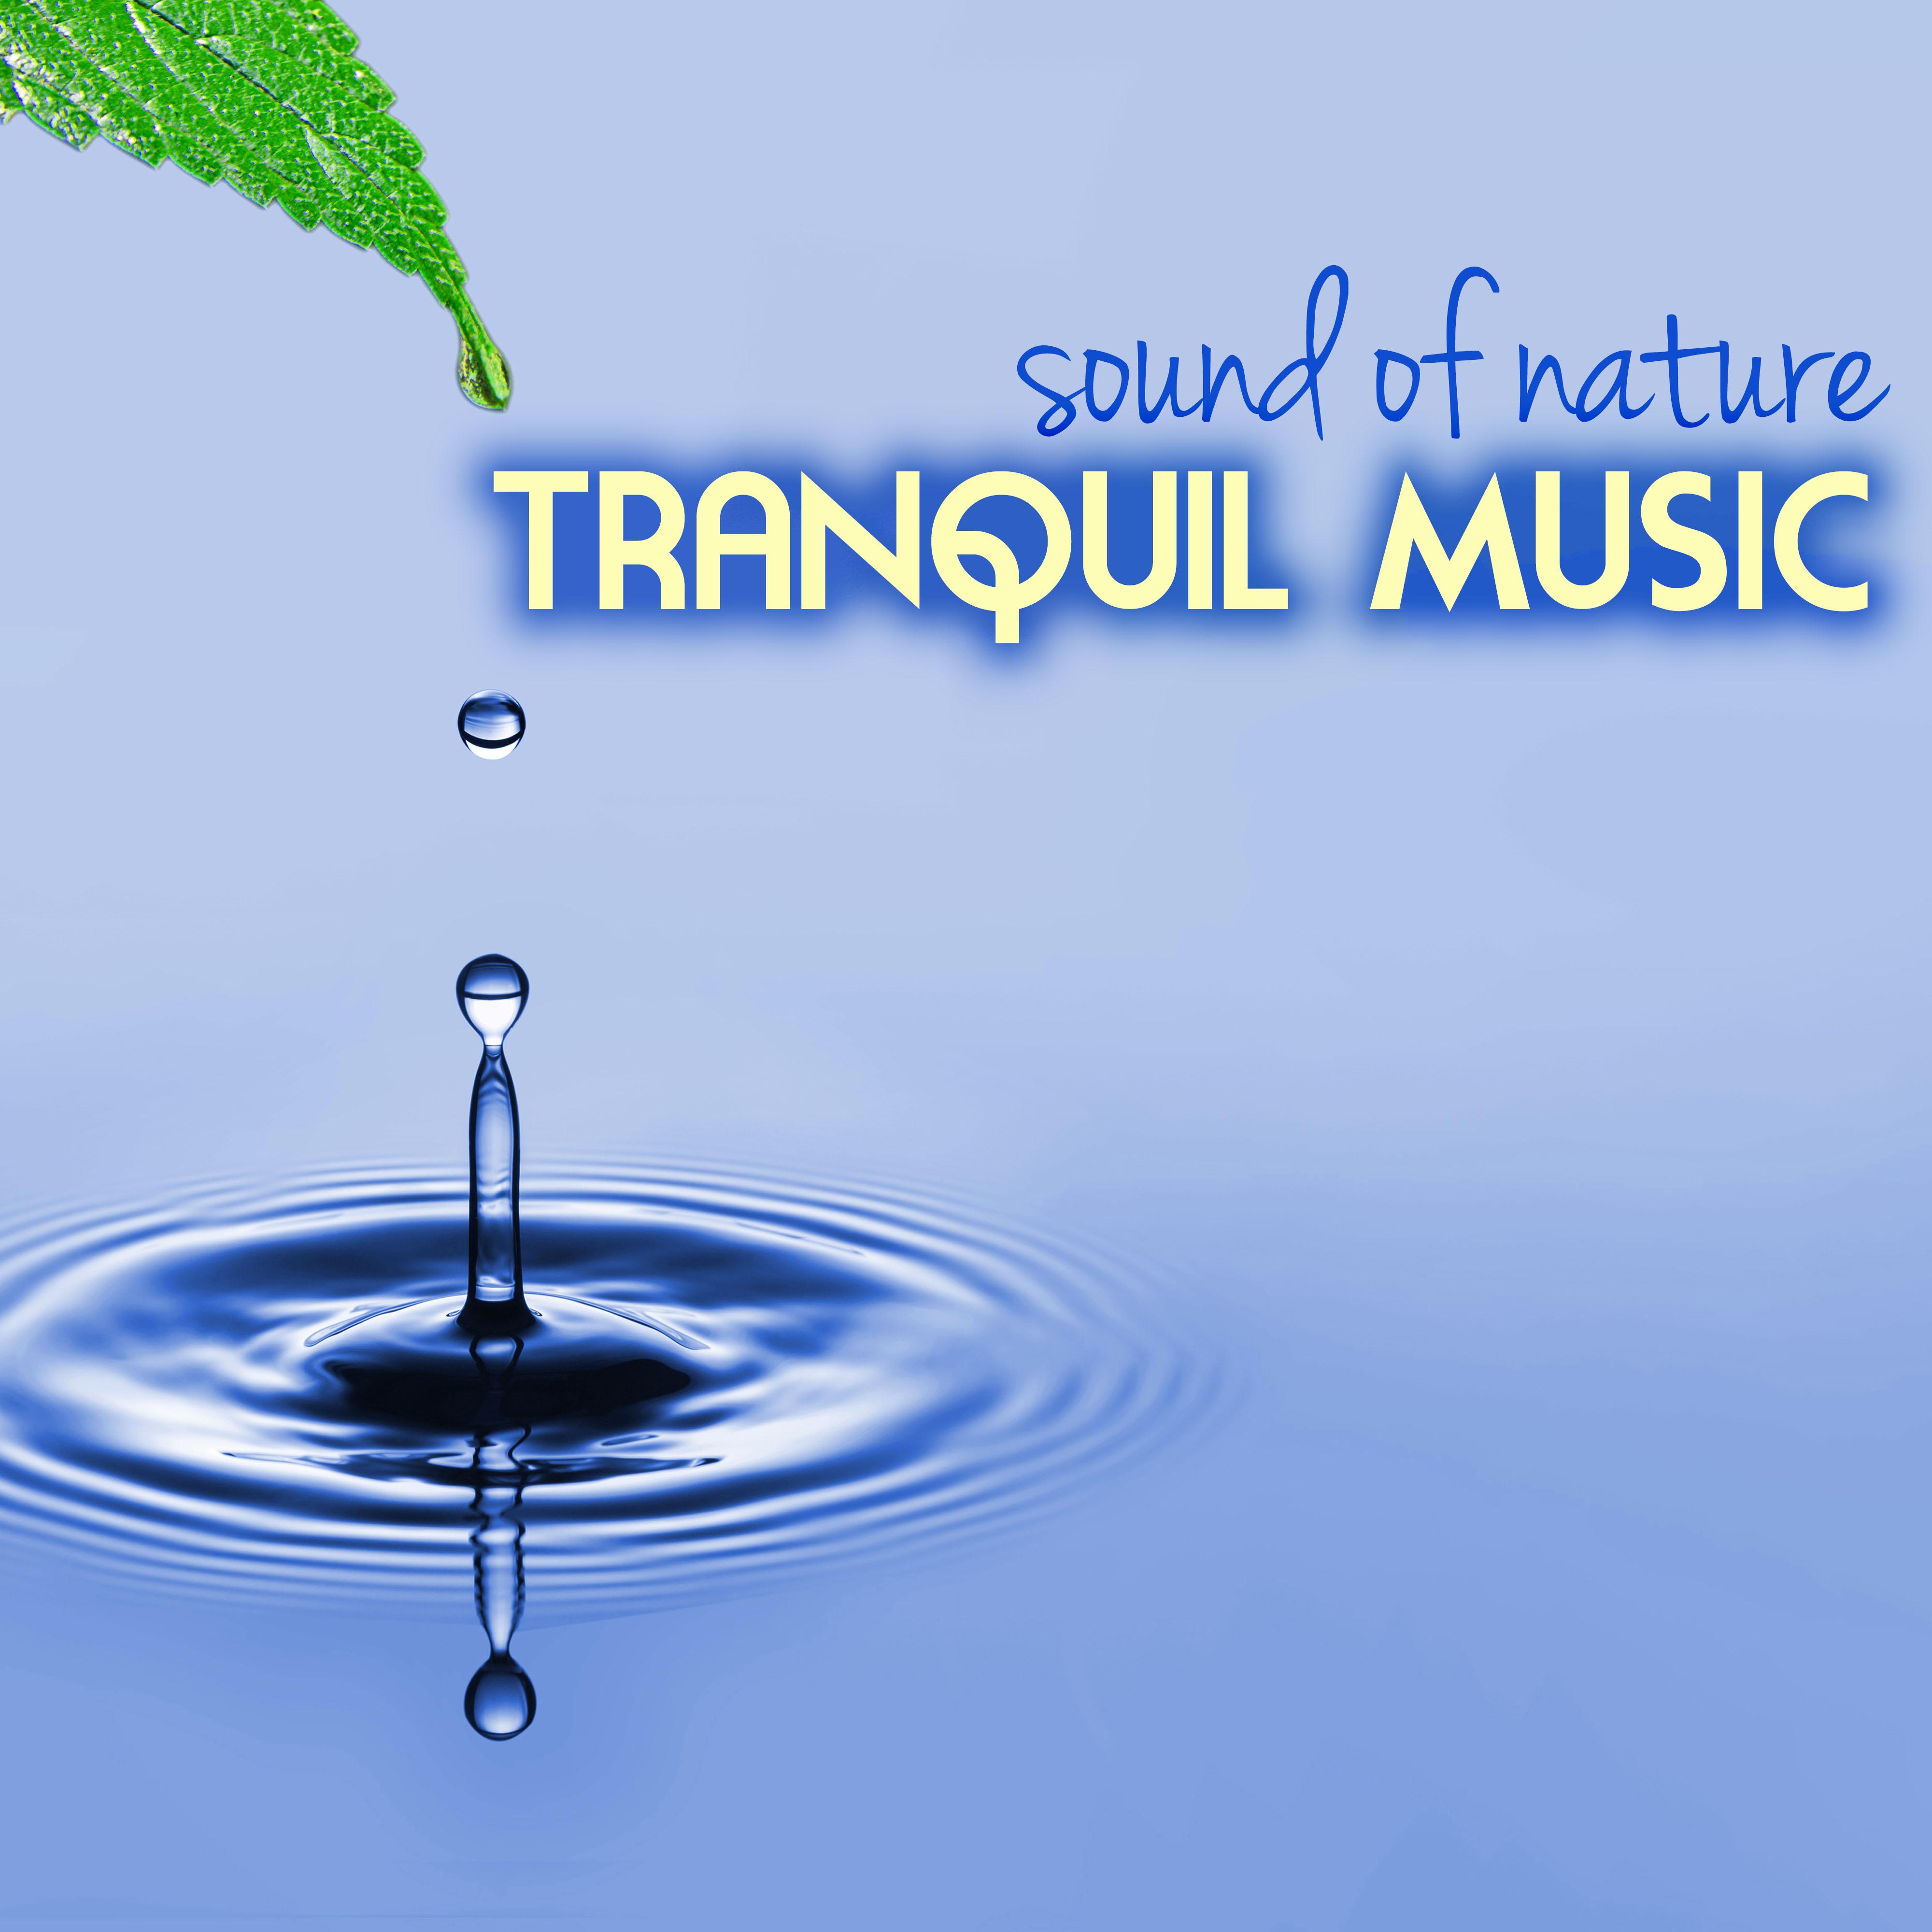 Tranquil Music - Sound of Nature Relaxation Soundscapes